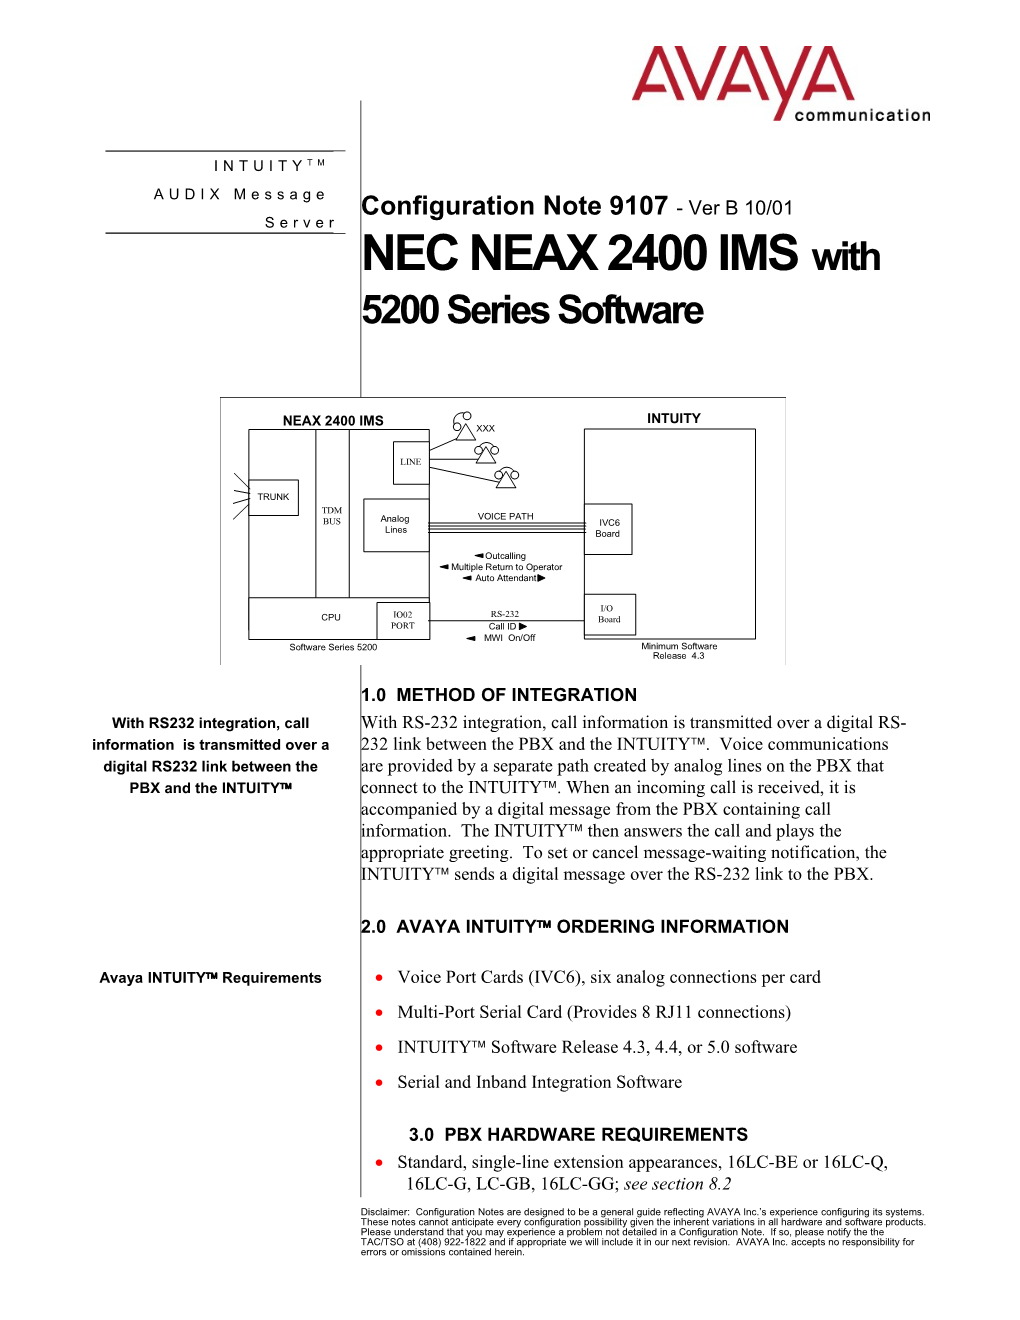 NEC NEAX 2400 IMS with 5200 Series Software